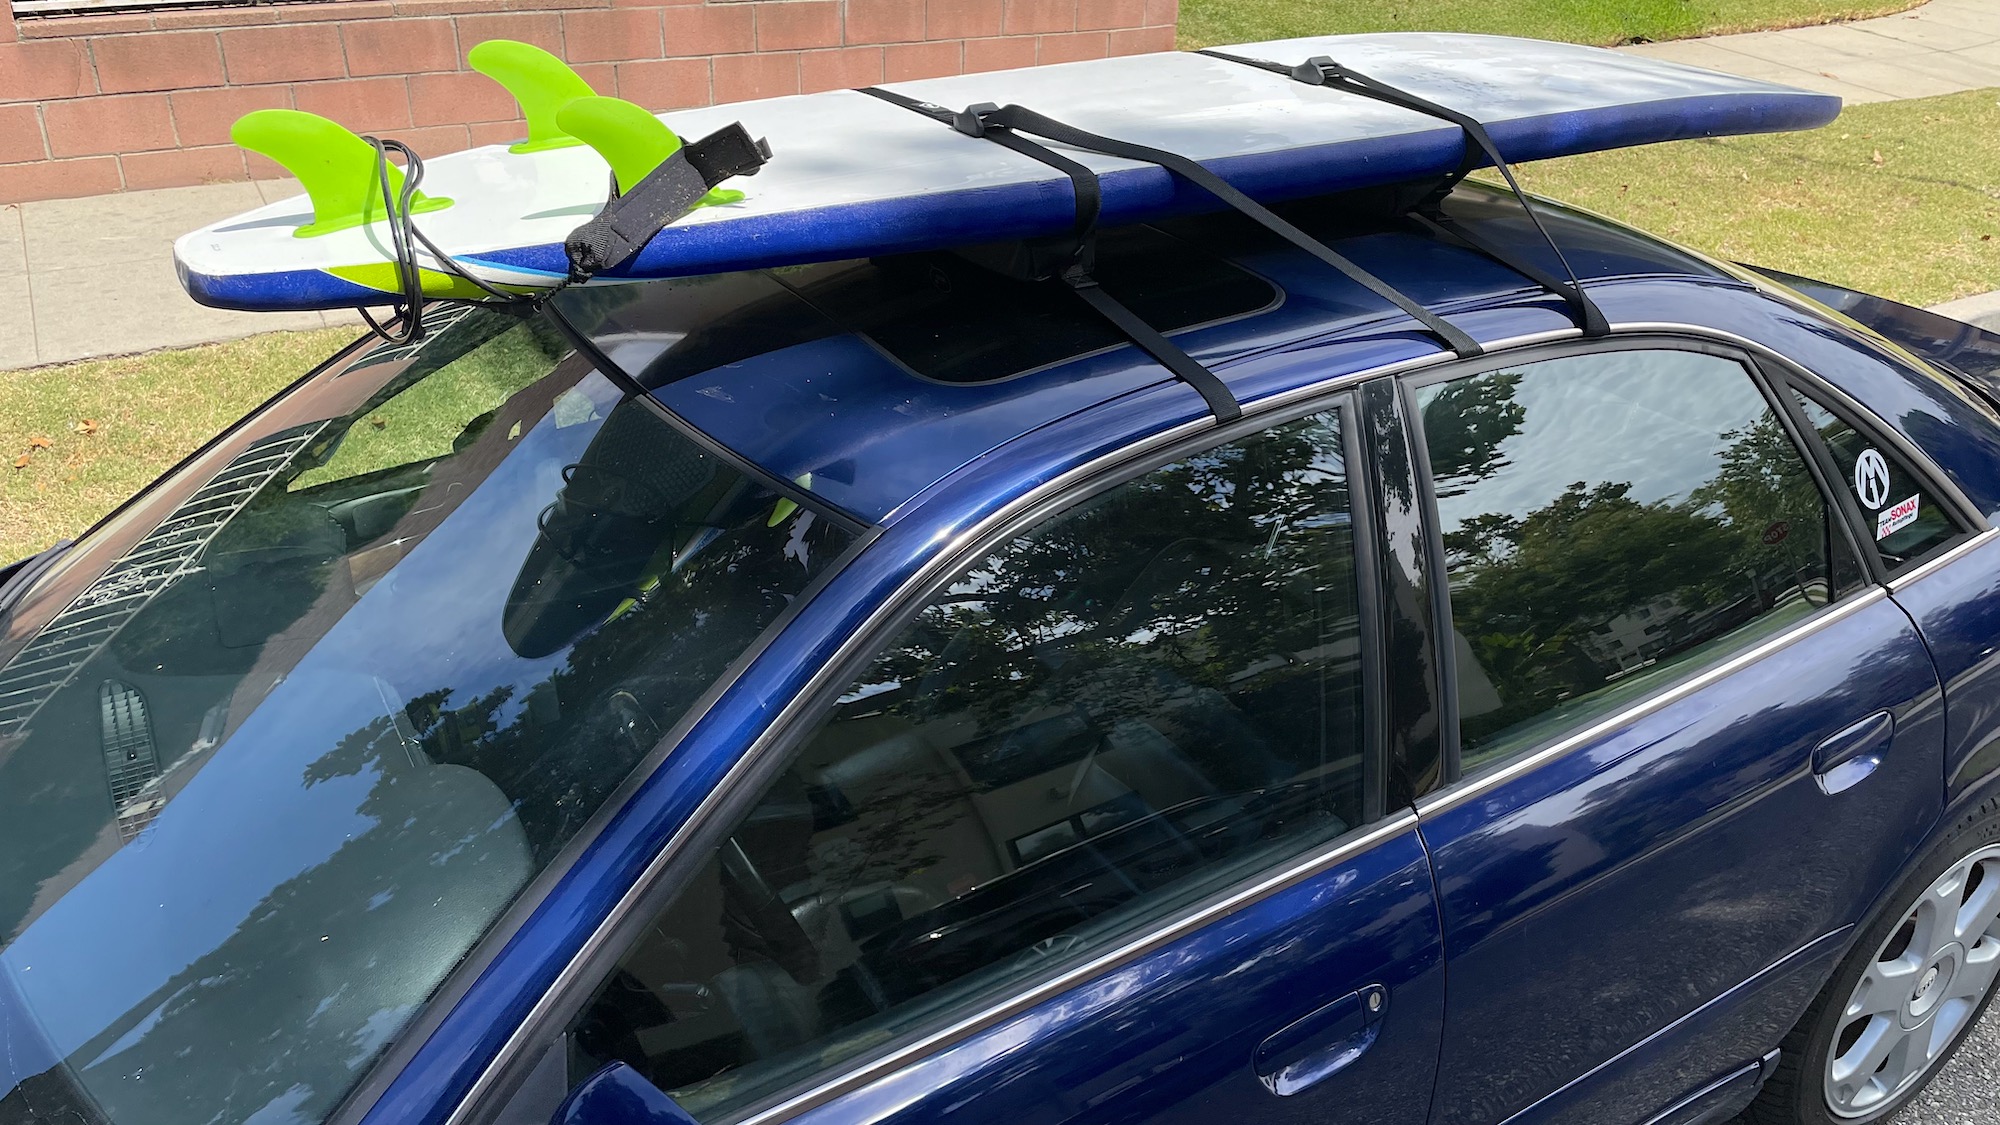 Universal Car Soft Roof Rack Cross Pads - sporting goods - by